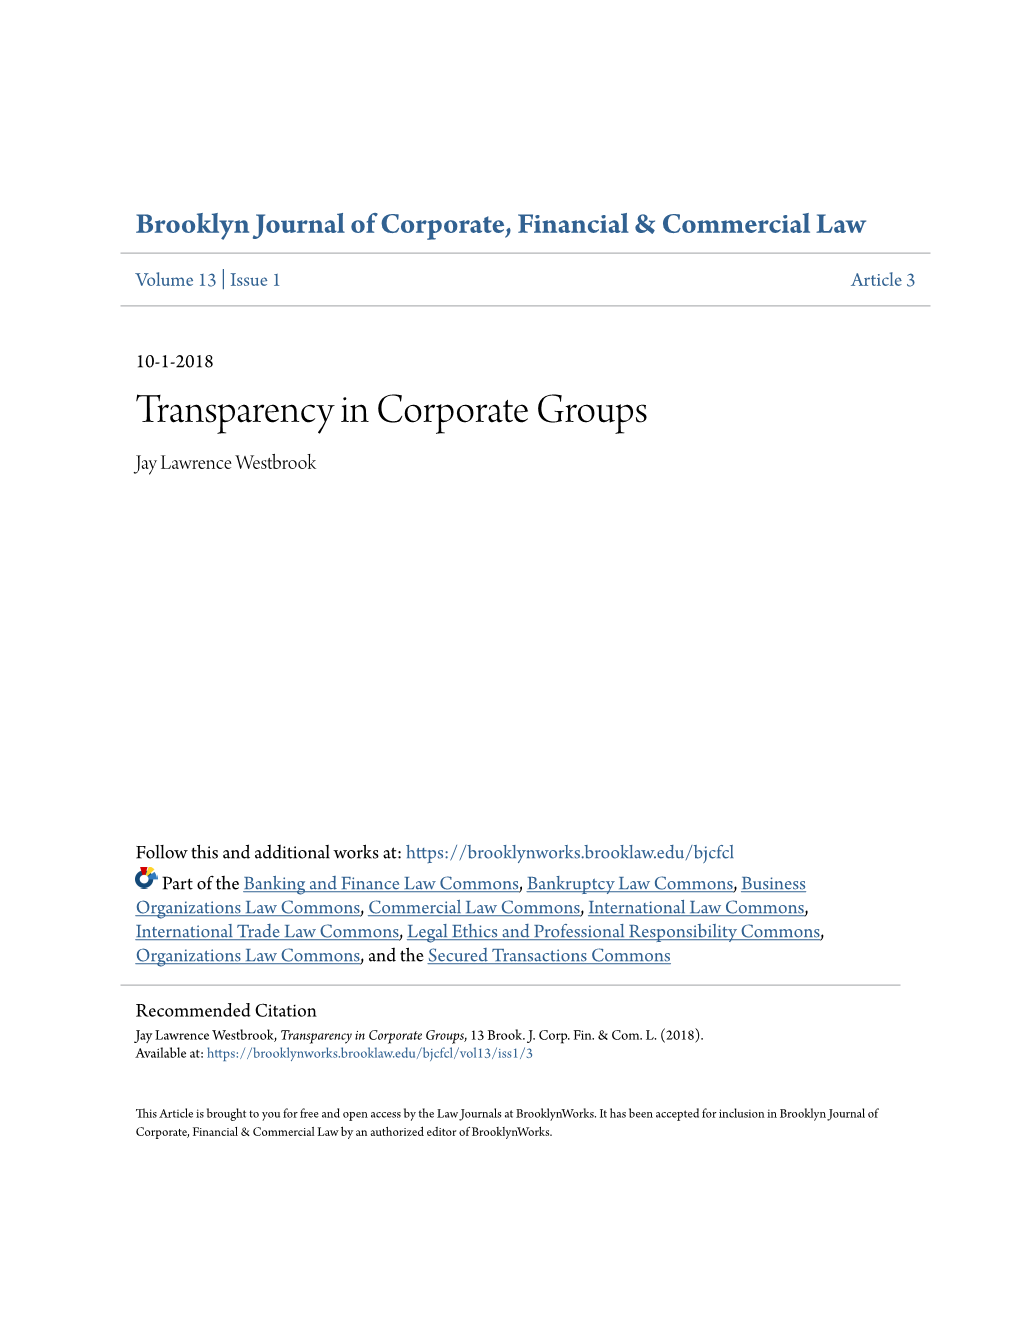 Transparency in Corporate Groups Jay Lawrence Westbrook